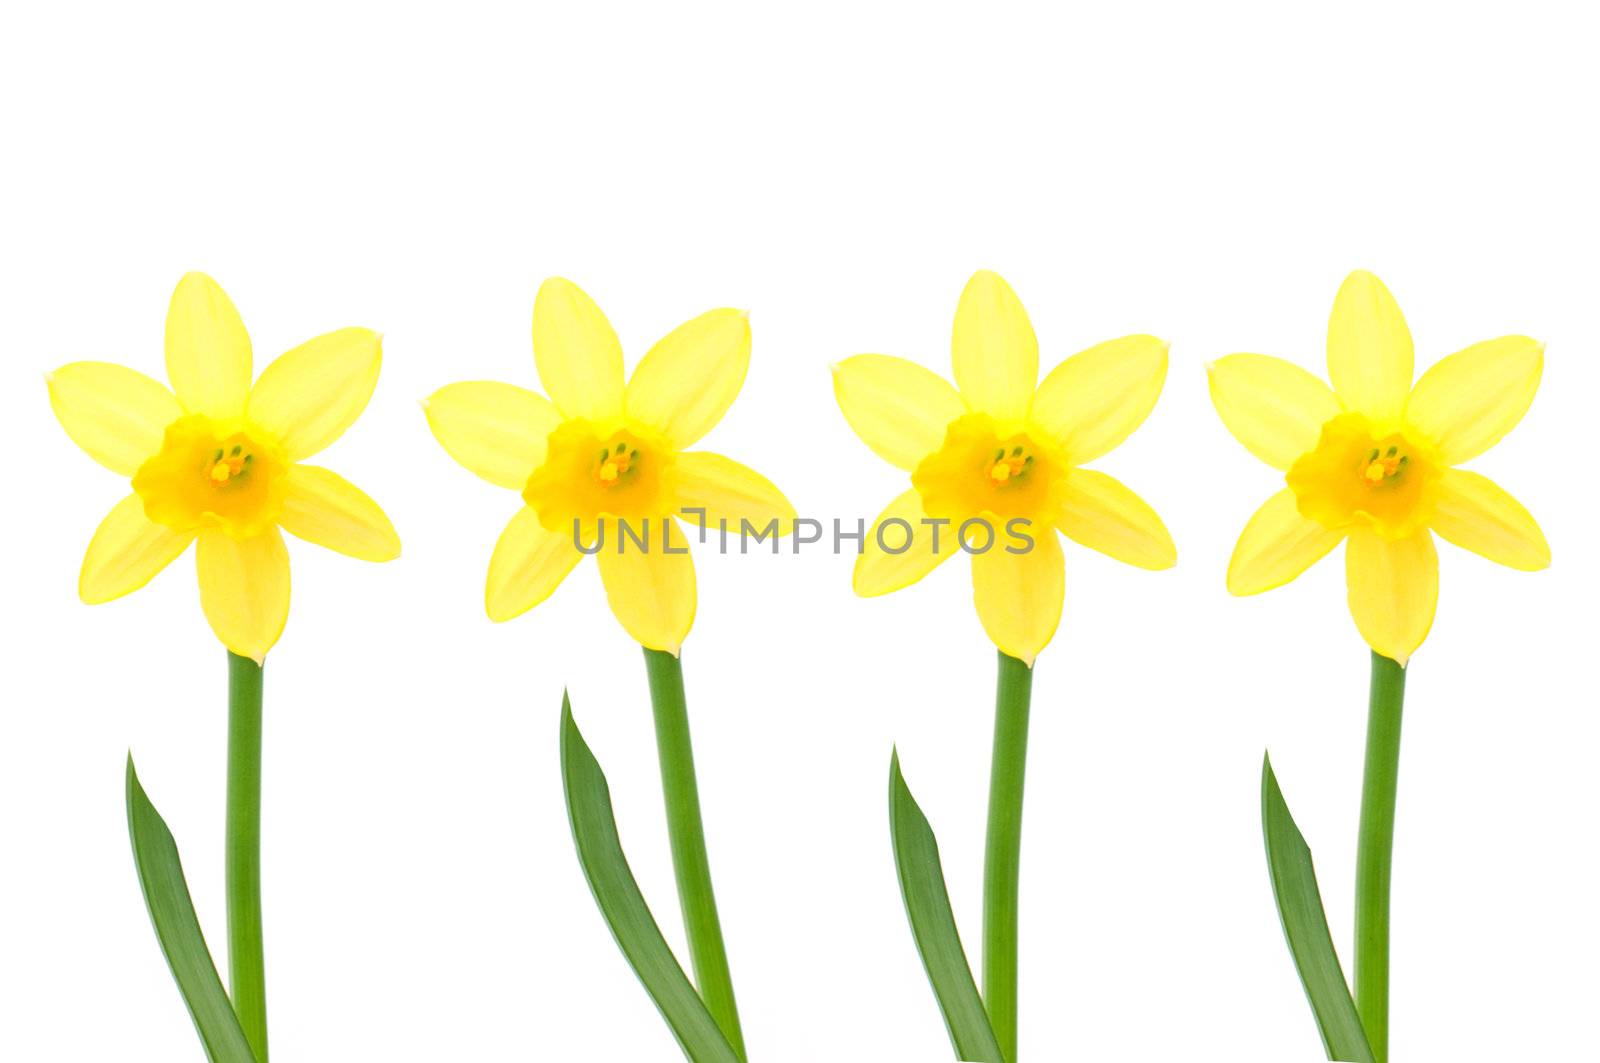 Spring daffodils isolated against white